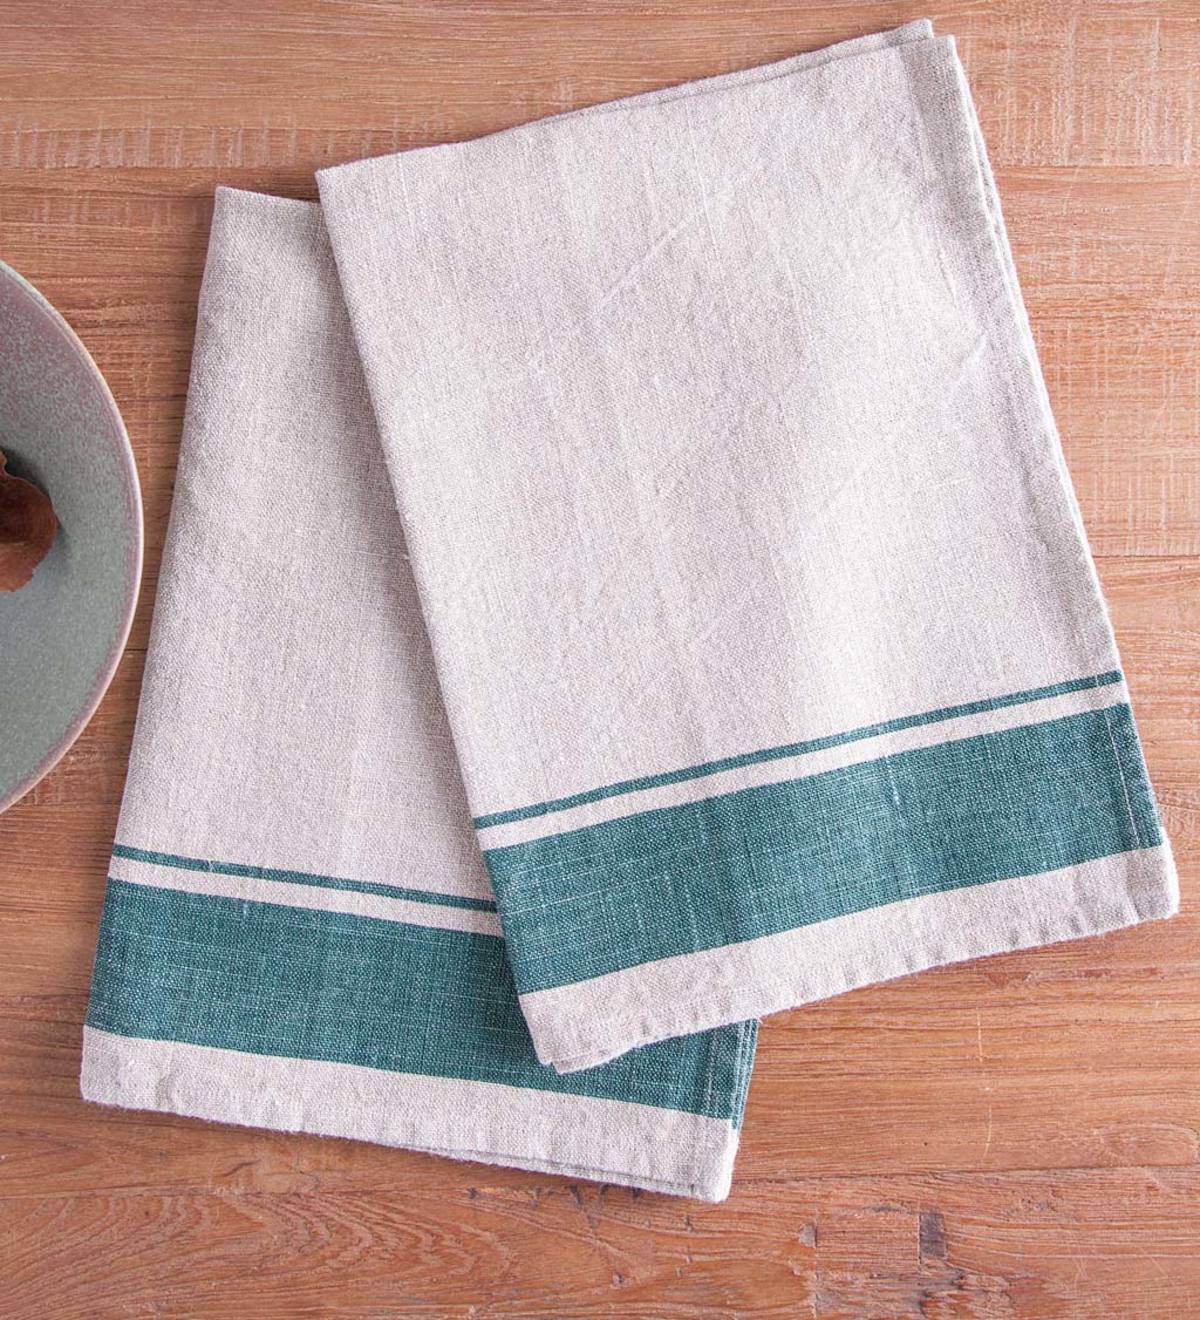 Set of 2 Linen French Stripe Kitchen Towels